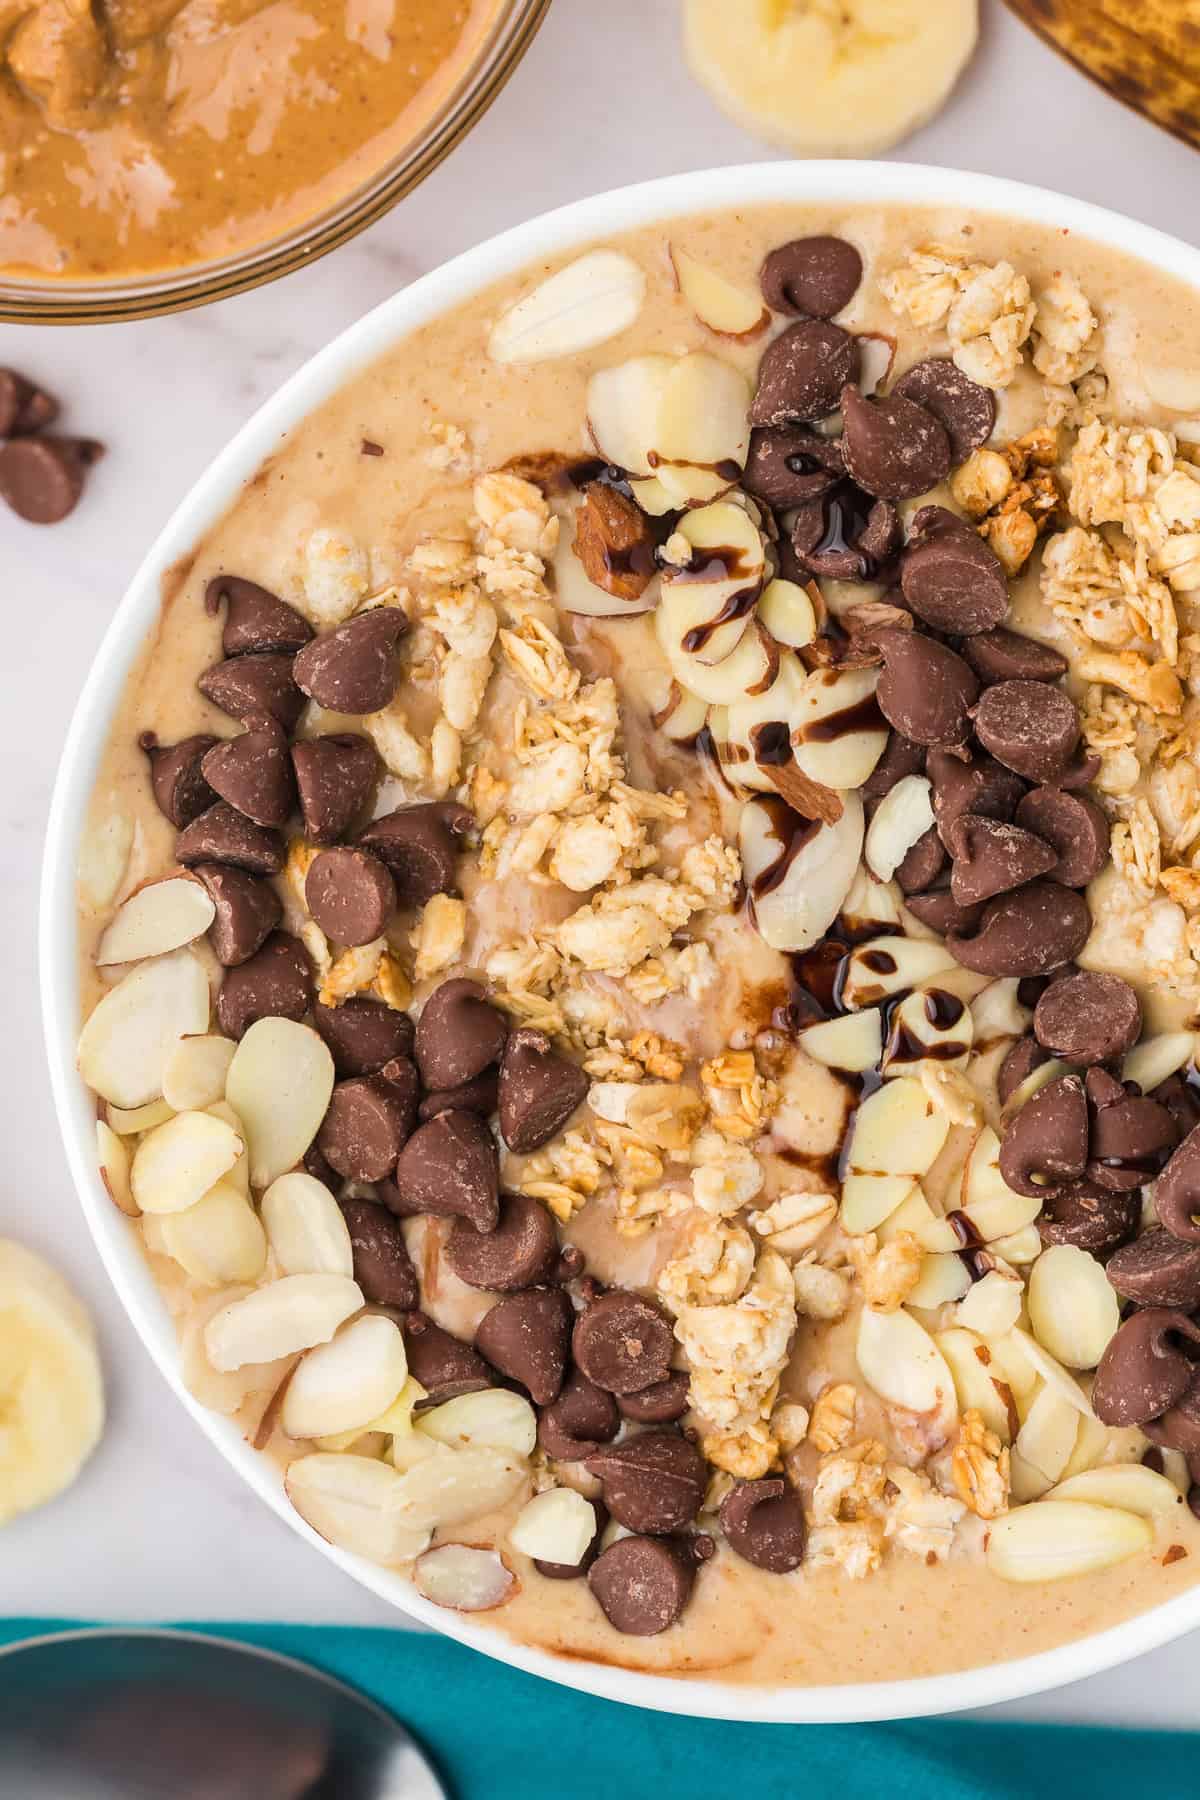 Peanut butter banana smoothie bowl with a variety of toppings.